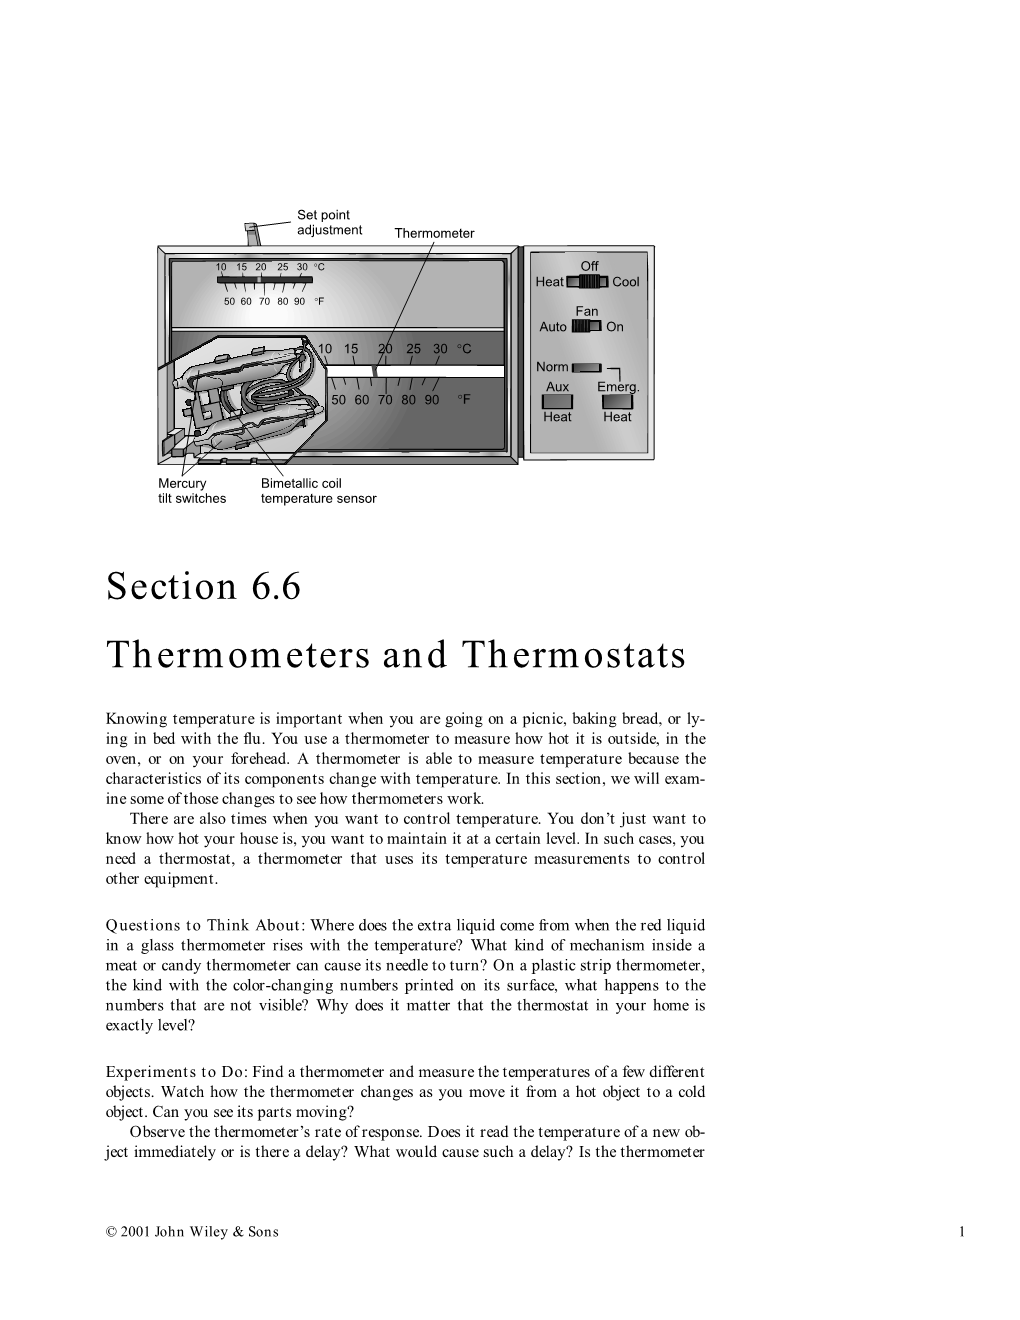 Section 6.6 Thermometers and Thermostats